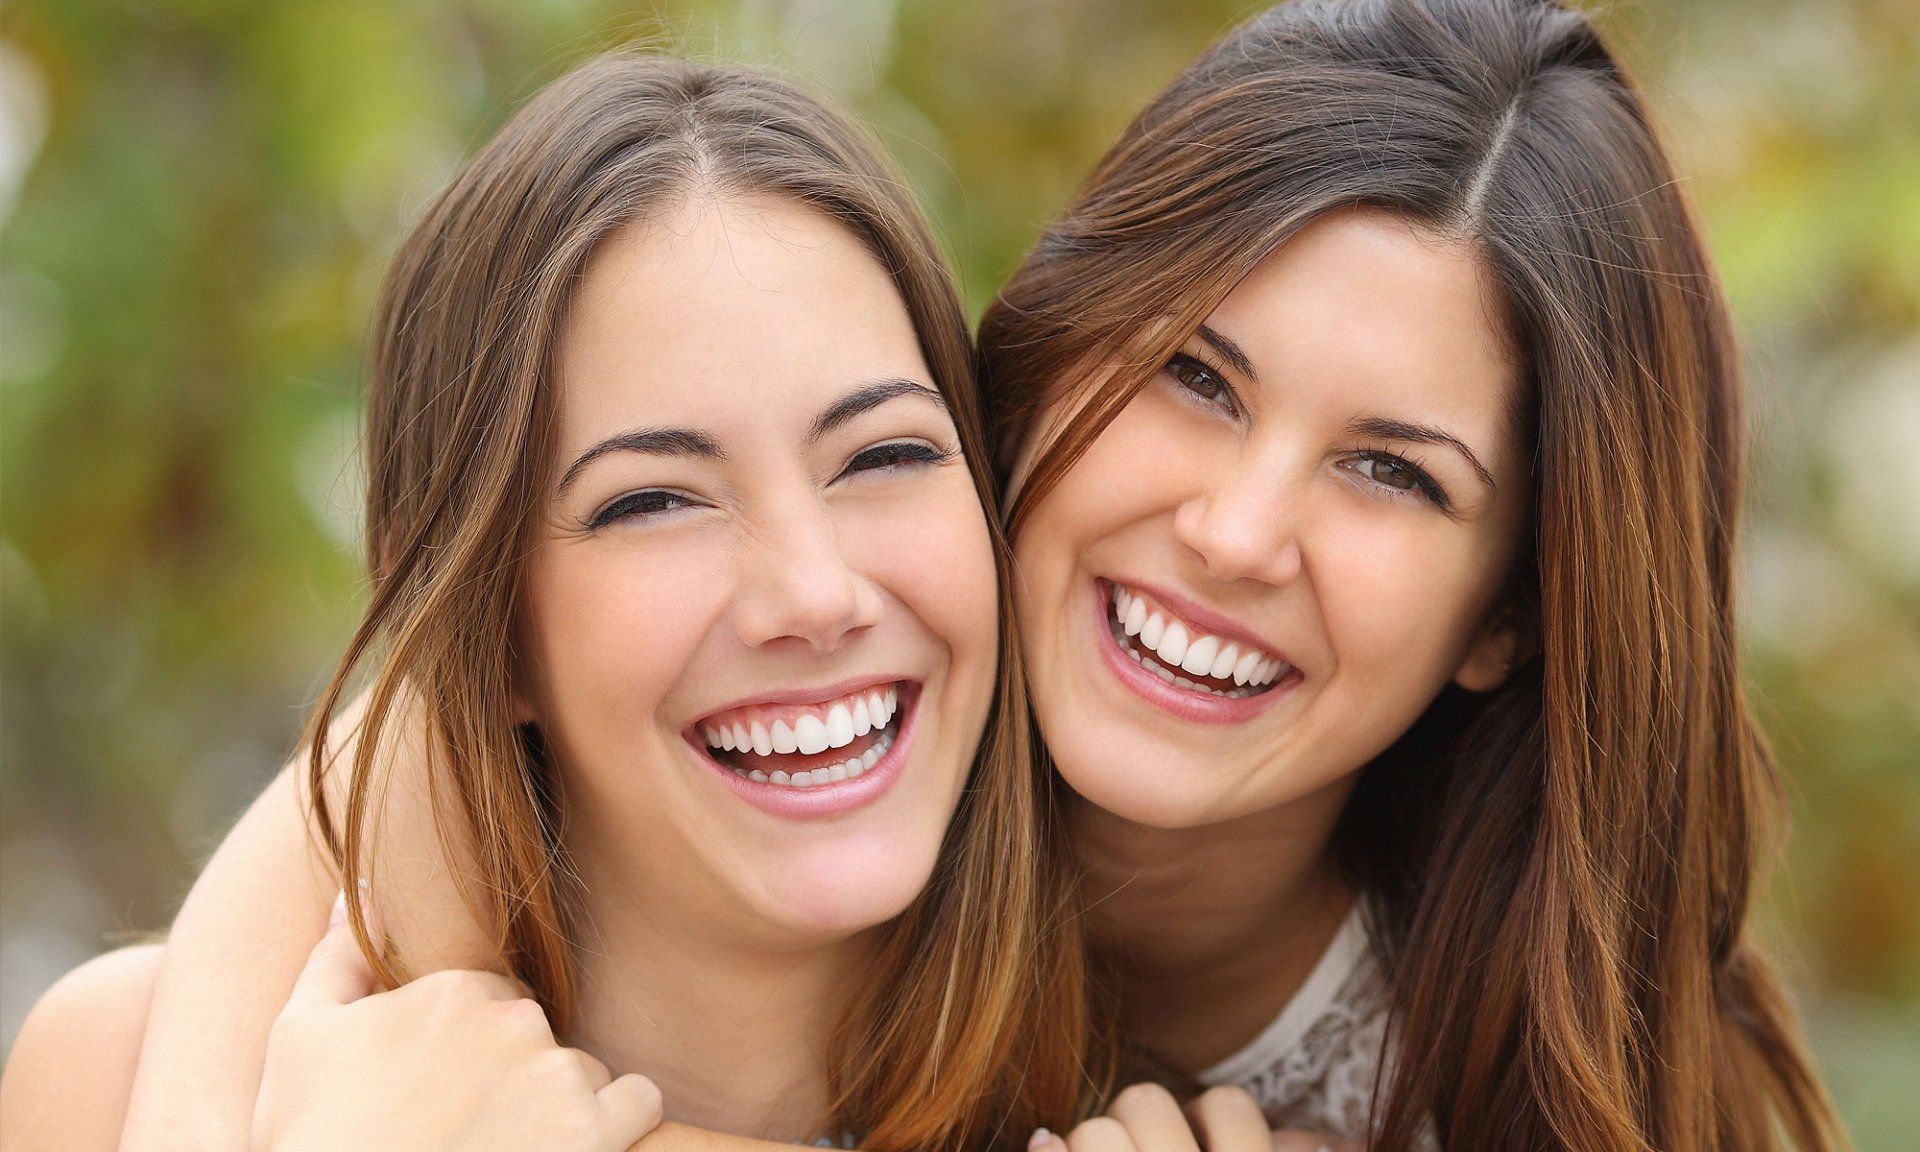 Two women with a beautiful smile